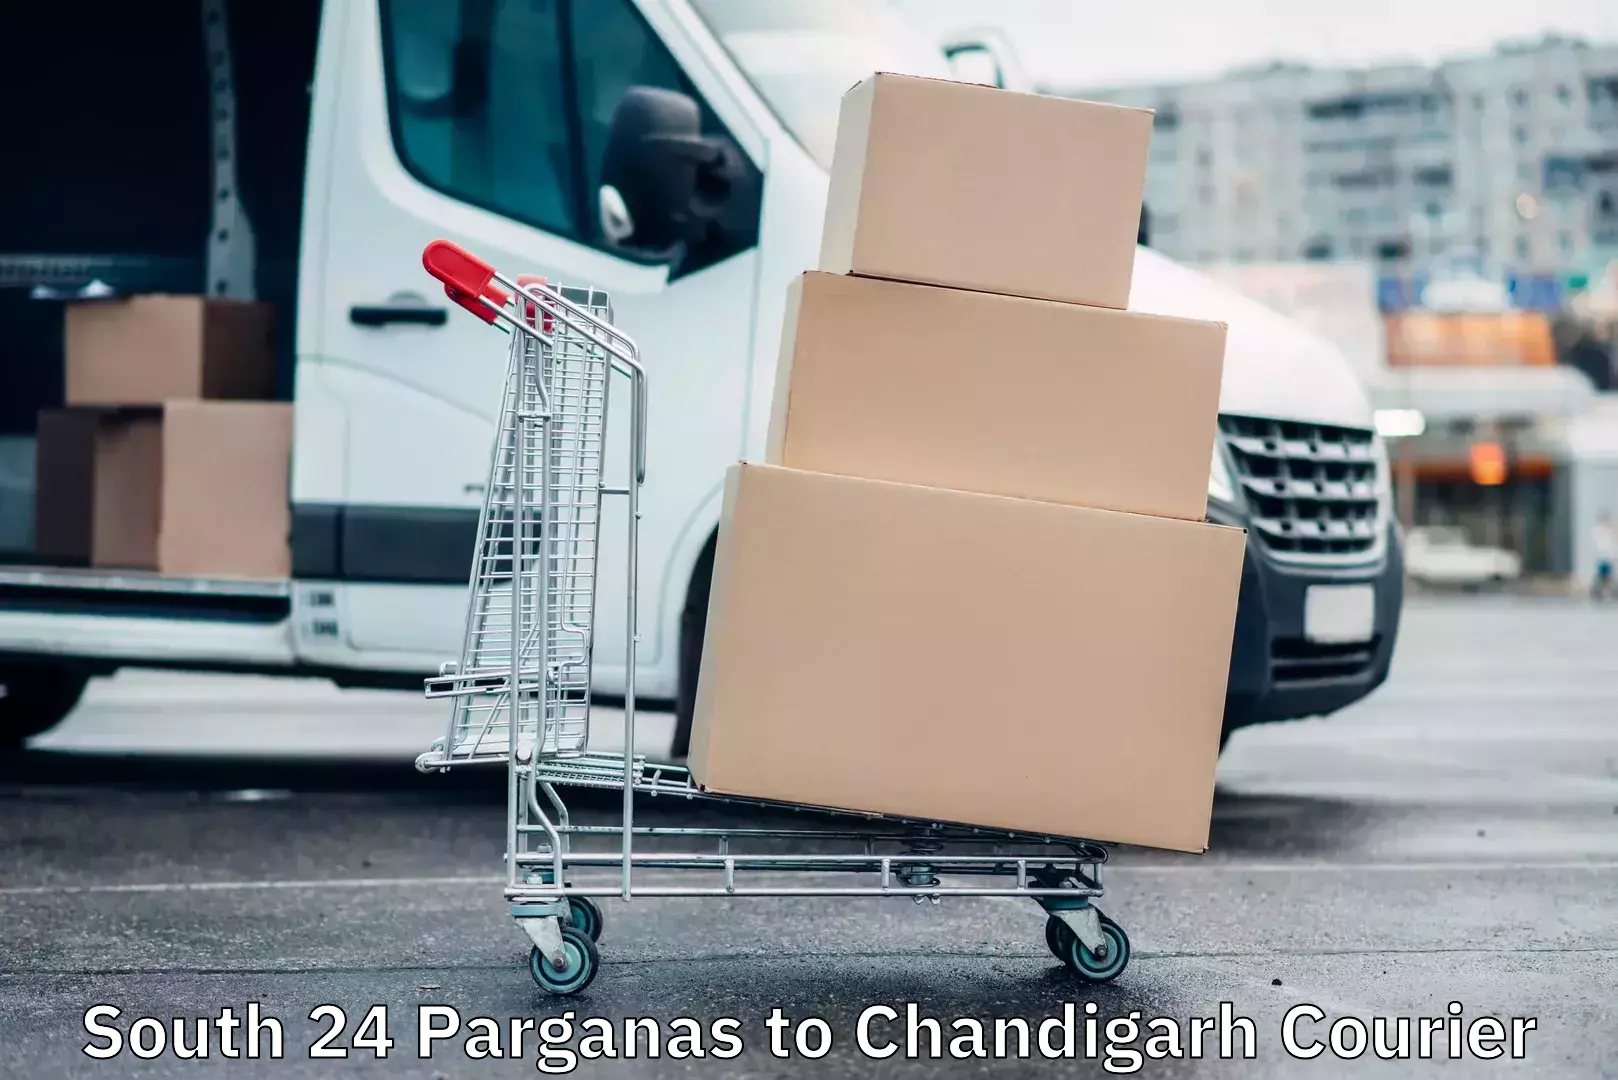 Pharmaceutical courier South 24 Parganas to Chandigarh